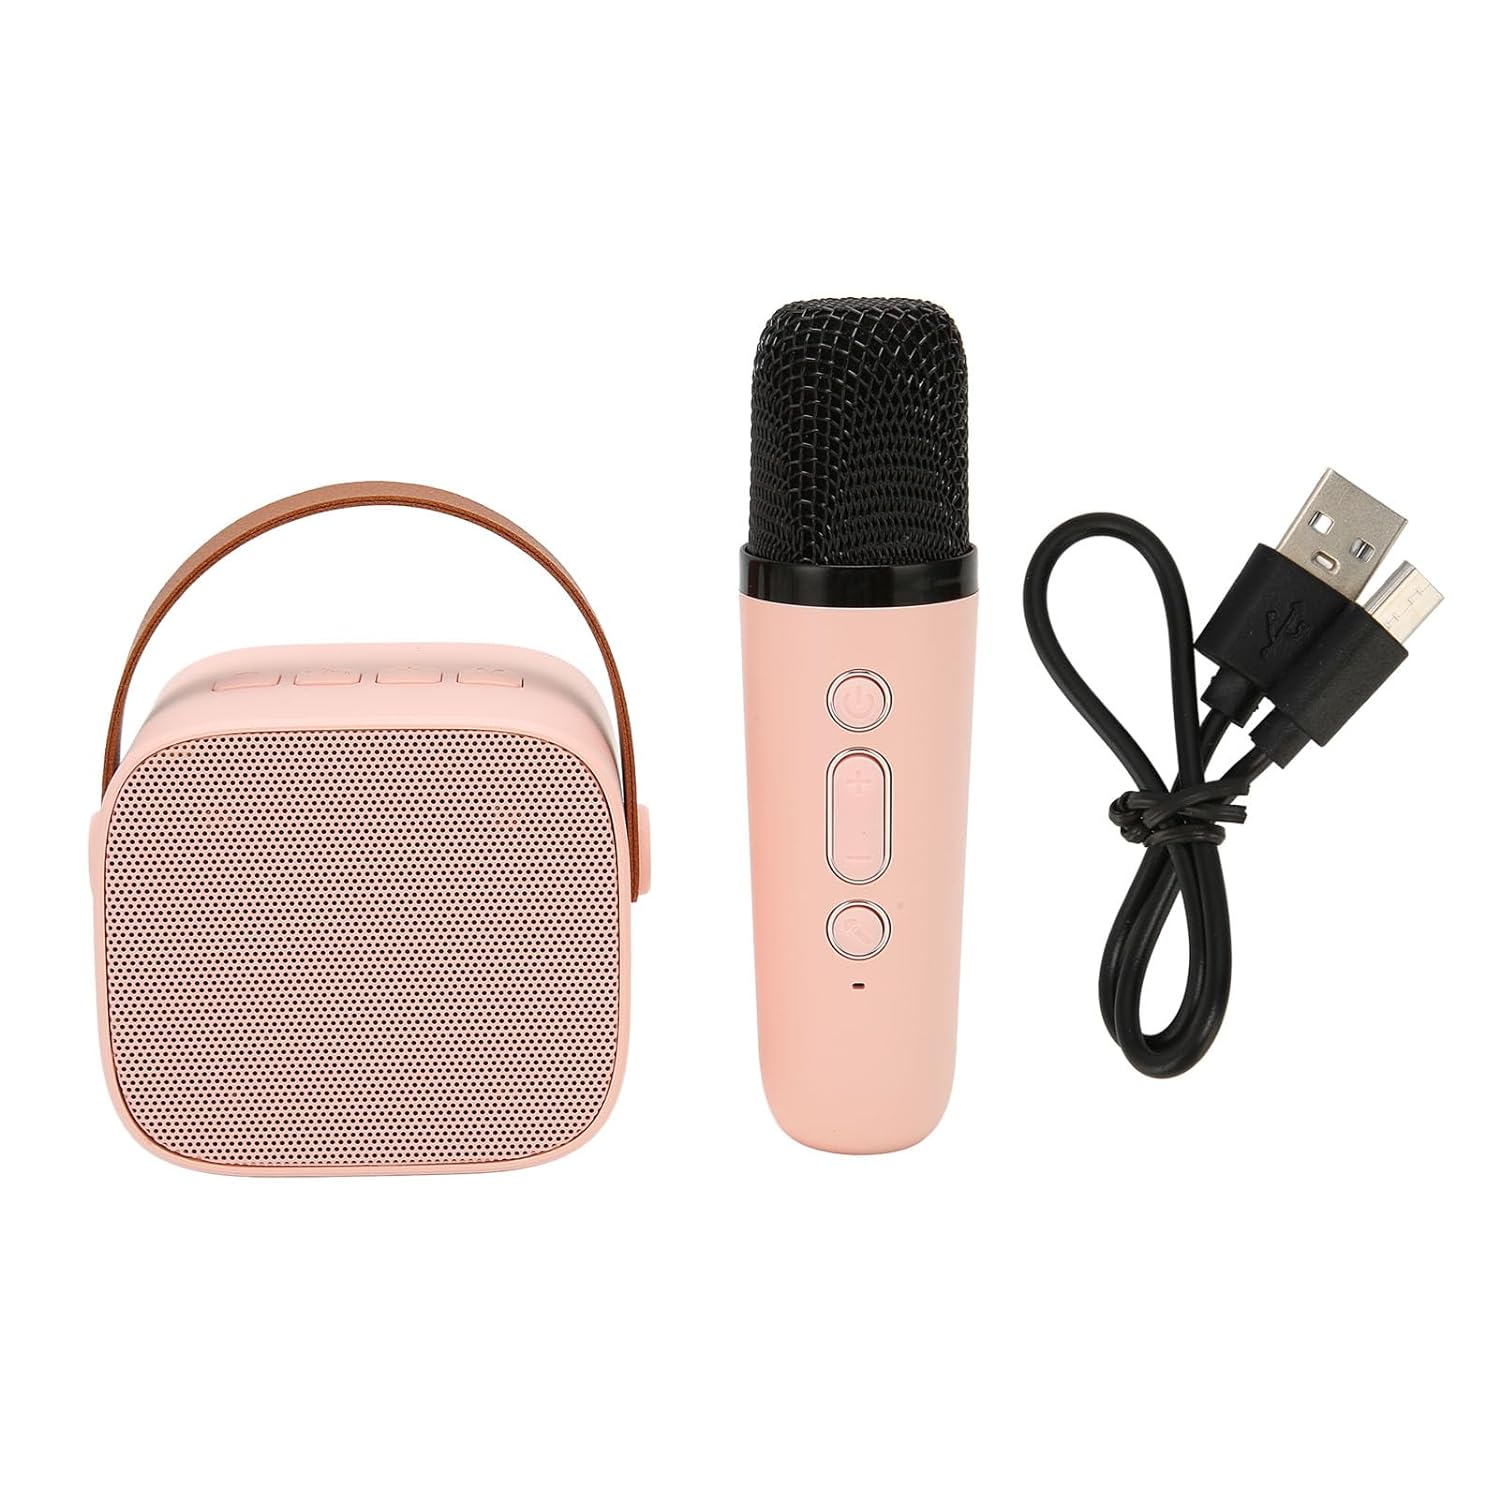 GOWENIC Portable Bluetooth Speaker with Microphone Set, Karaoke Machine for Adults and Kids, PA Singing Speaker System Set, Retro Bluetooth Speaker with Machine (Pink)